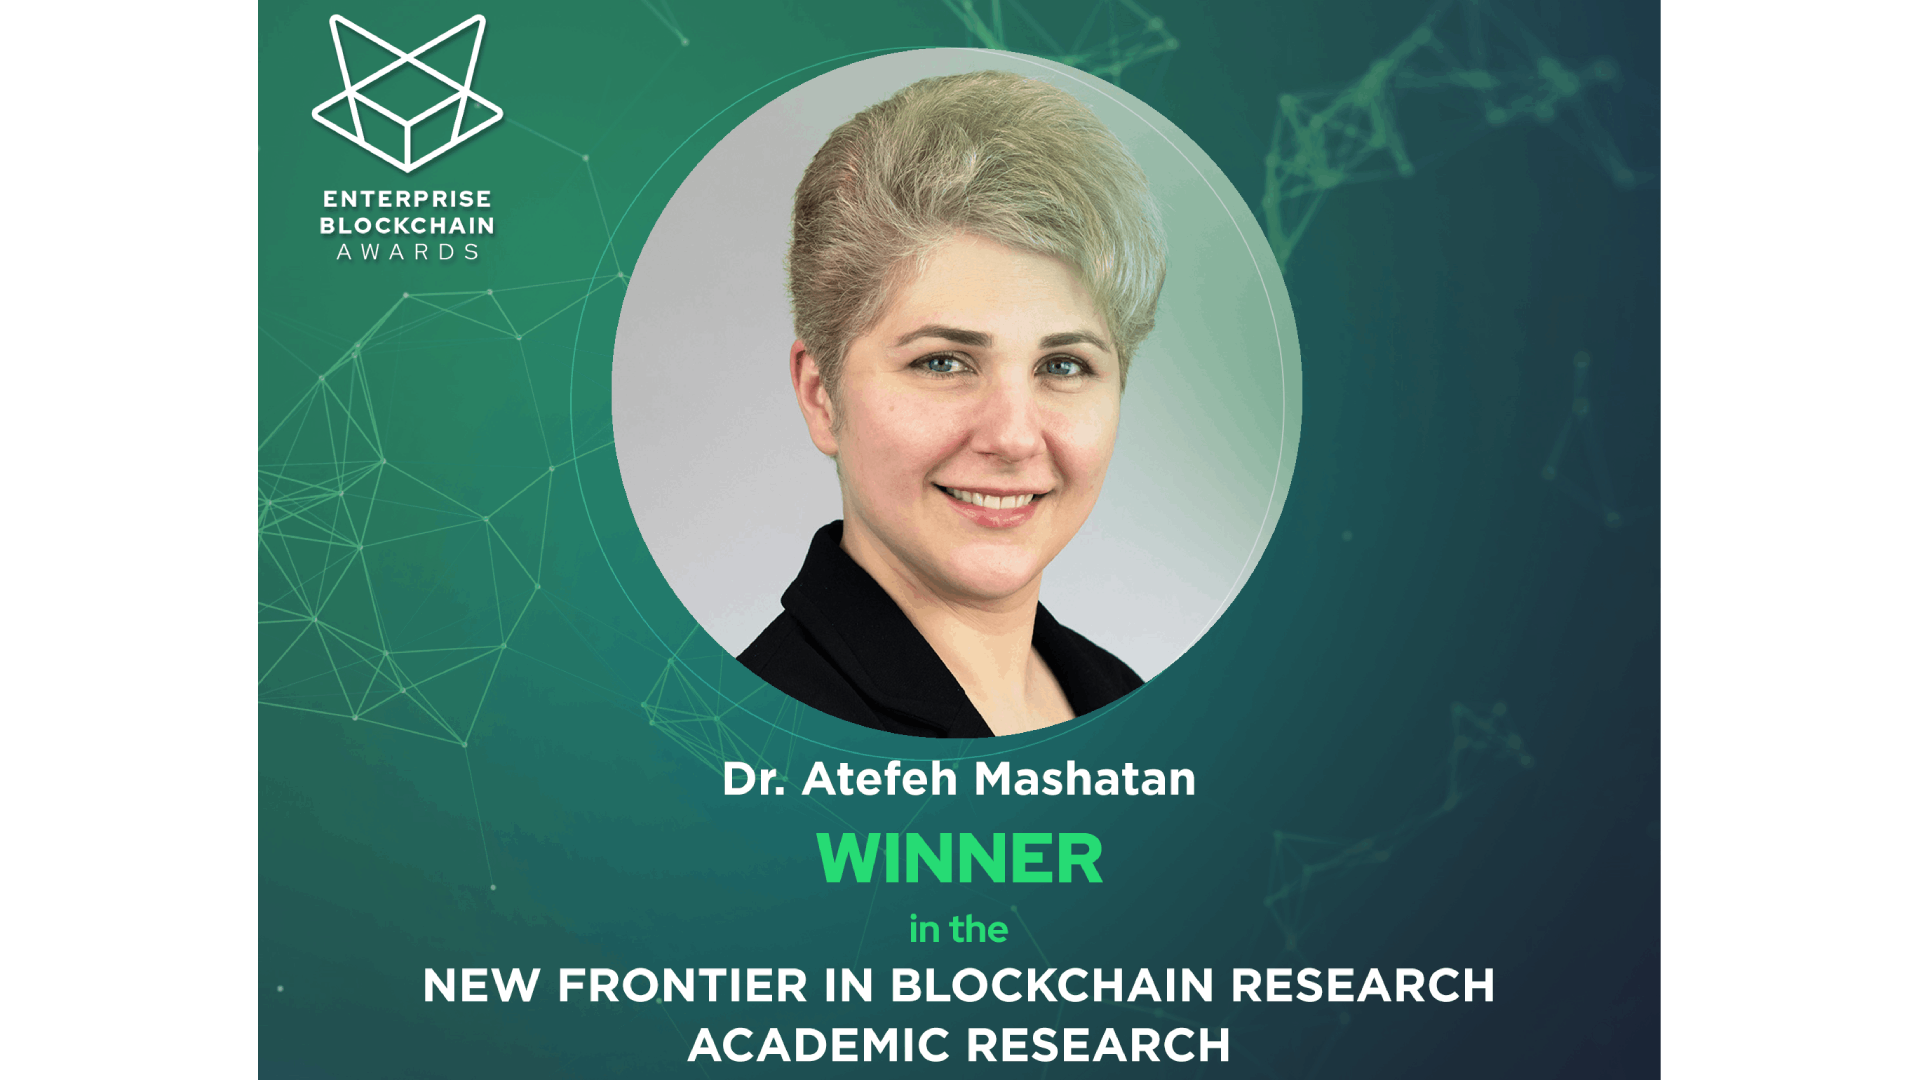 Dr. Atefeh Mashatan Wins New Frontier in Blockchain Academic Research